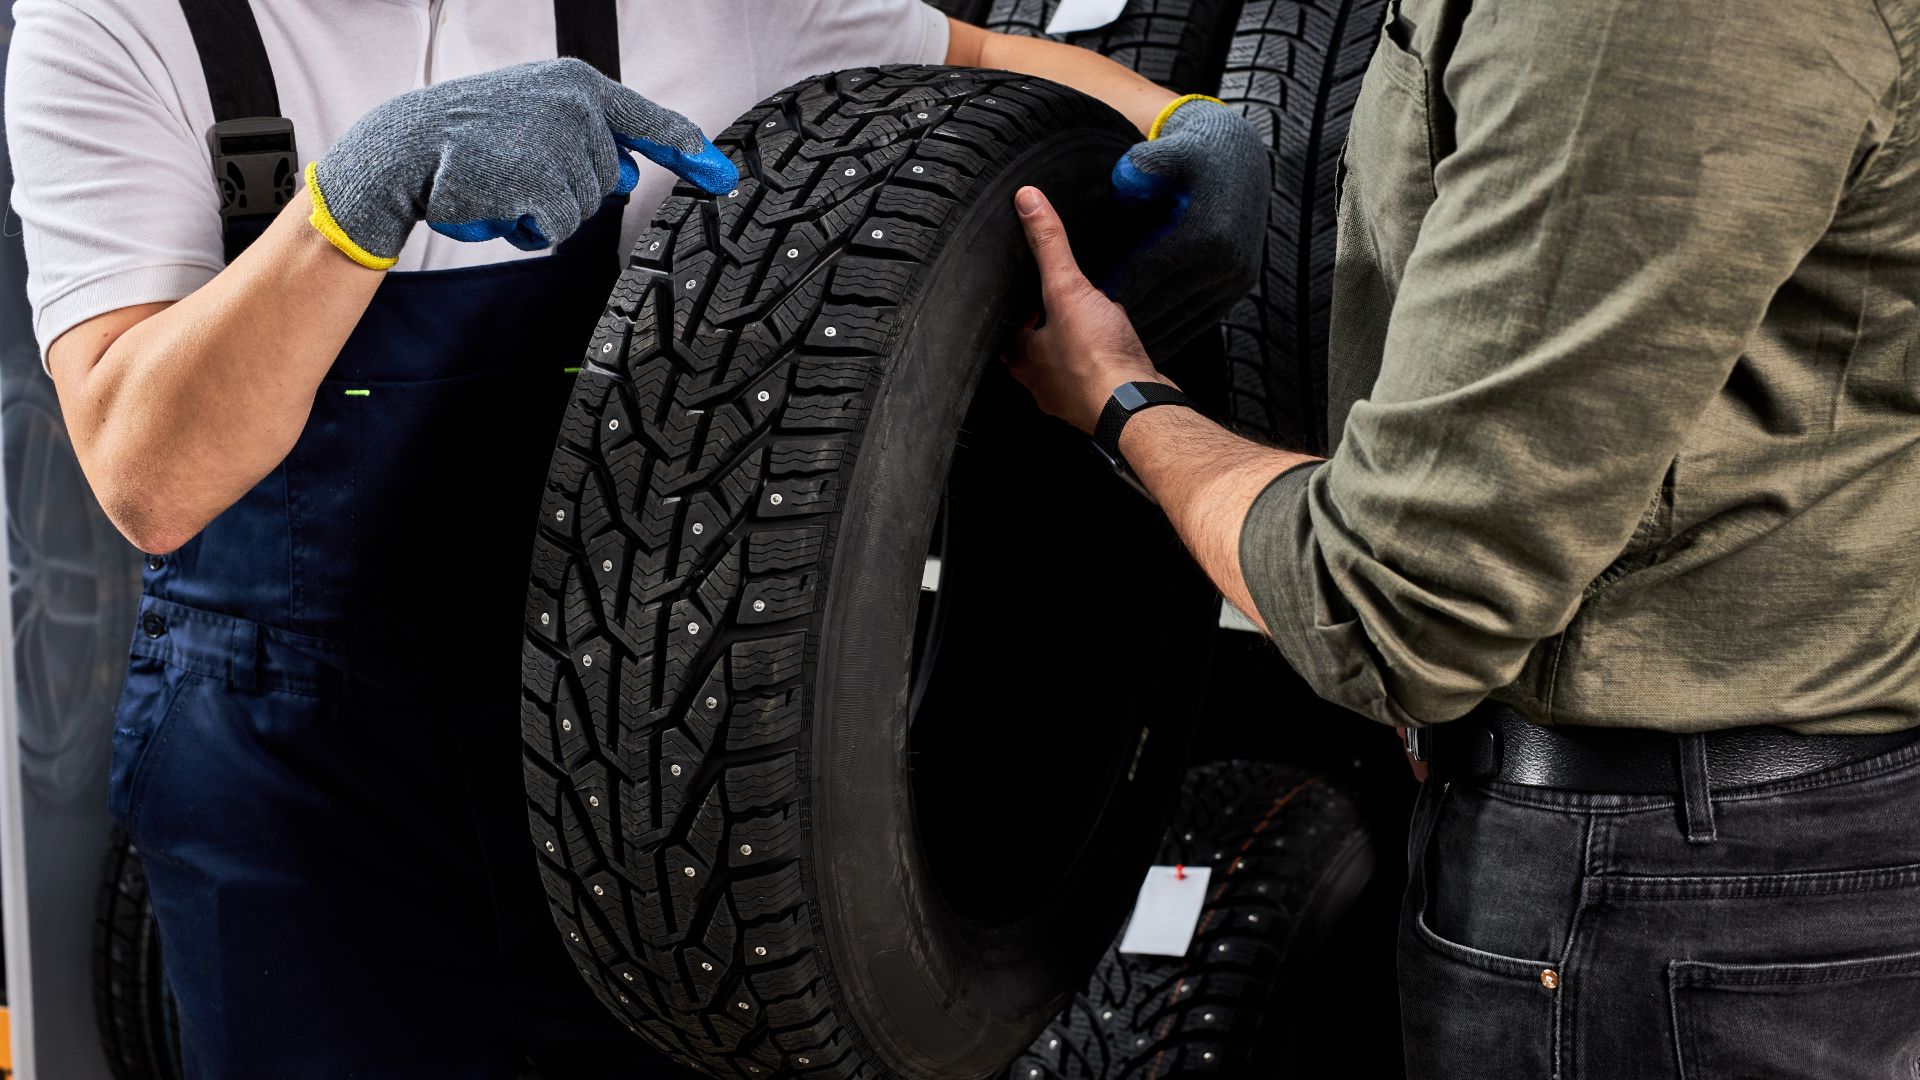 a group of men working on a tire.